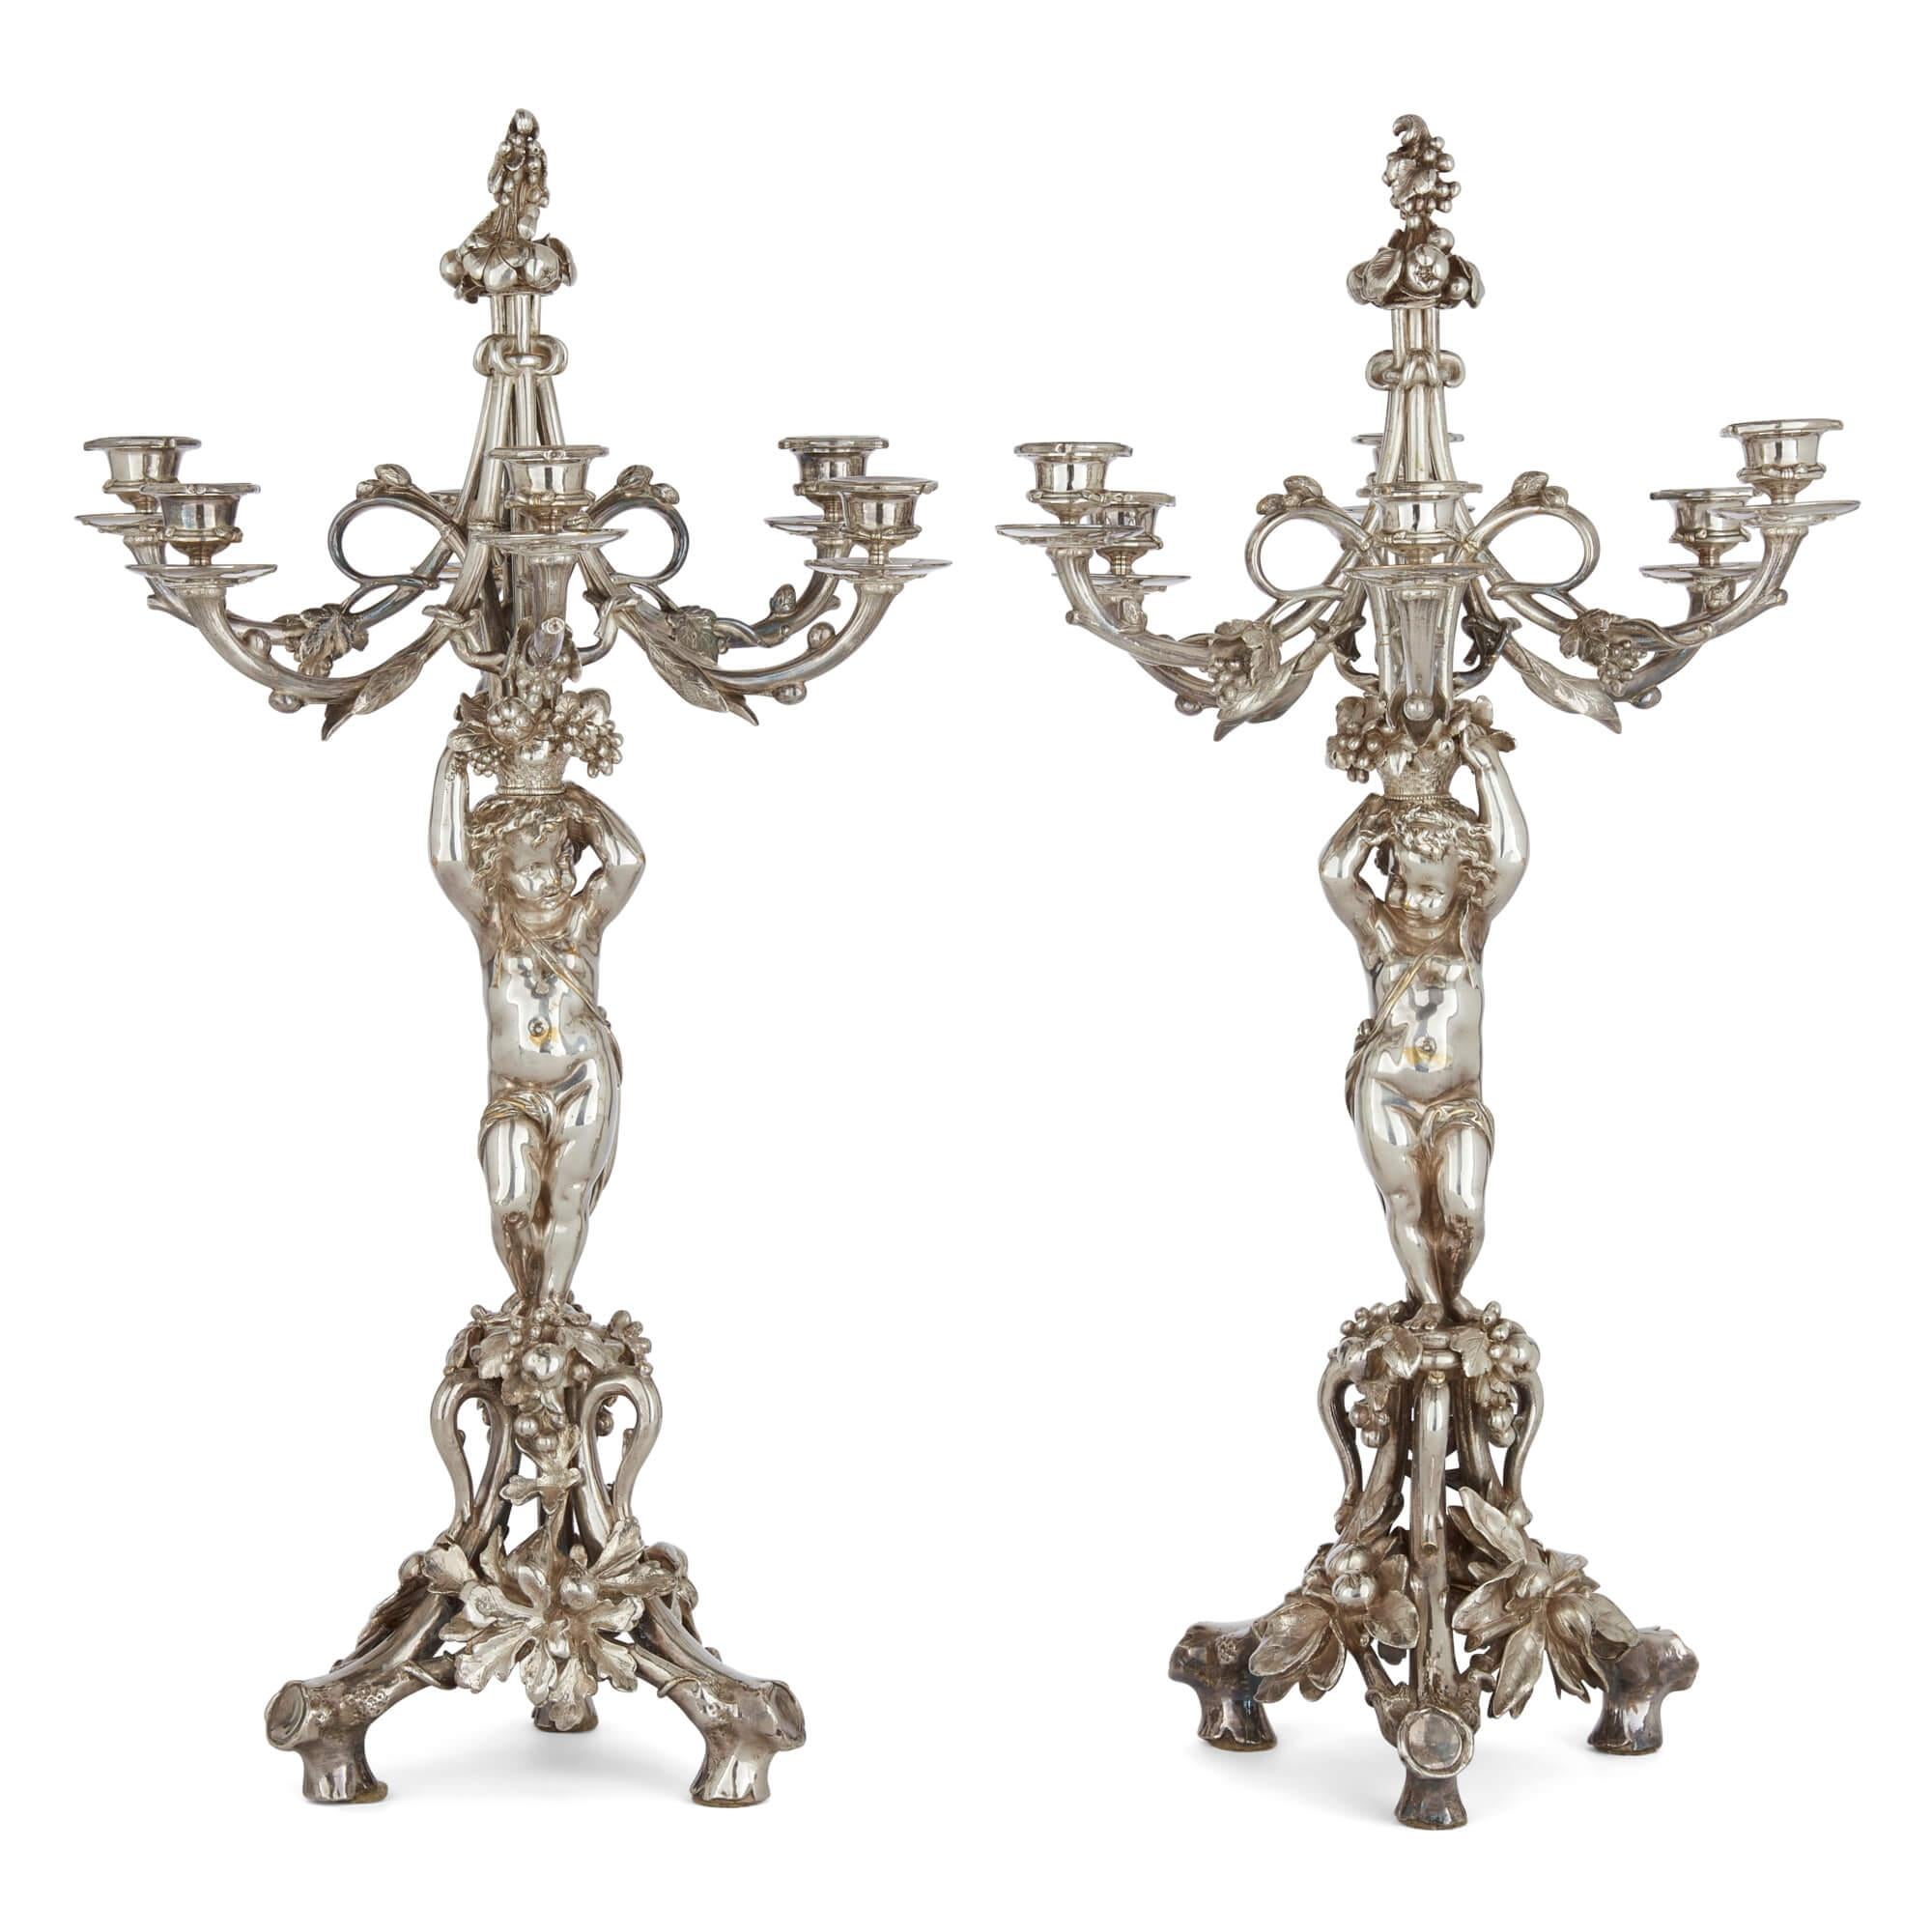 Pair of six-light silvered bronze candelabra attributed to Christofle 
French, 19th Century
Height 65cm, diameter 37cm

This superb pair of candelabra are crafted in the opulent Rococo style. Standing atop three trunk-style feet, the bases feature